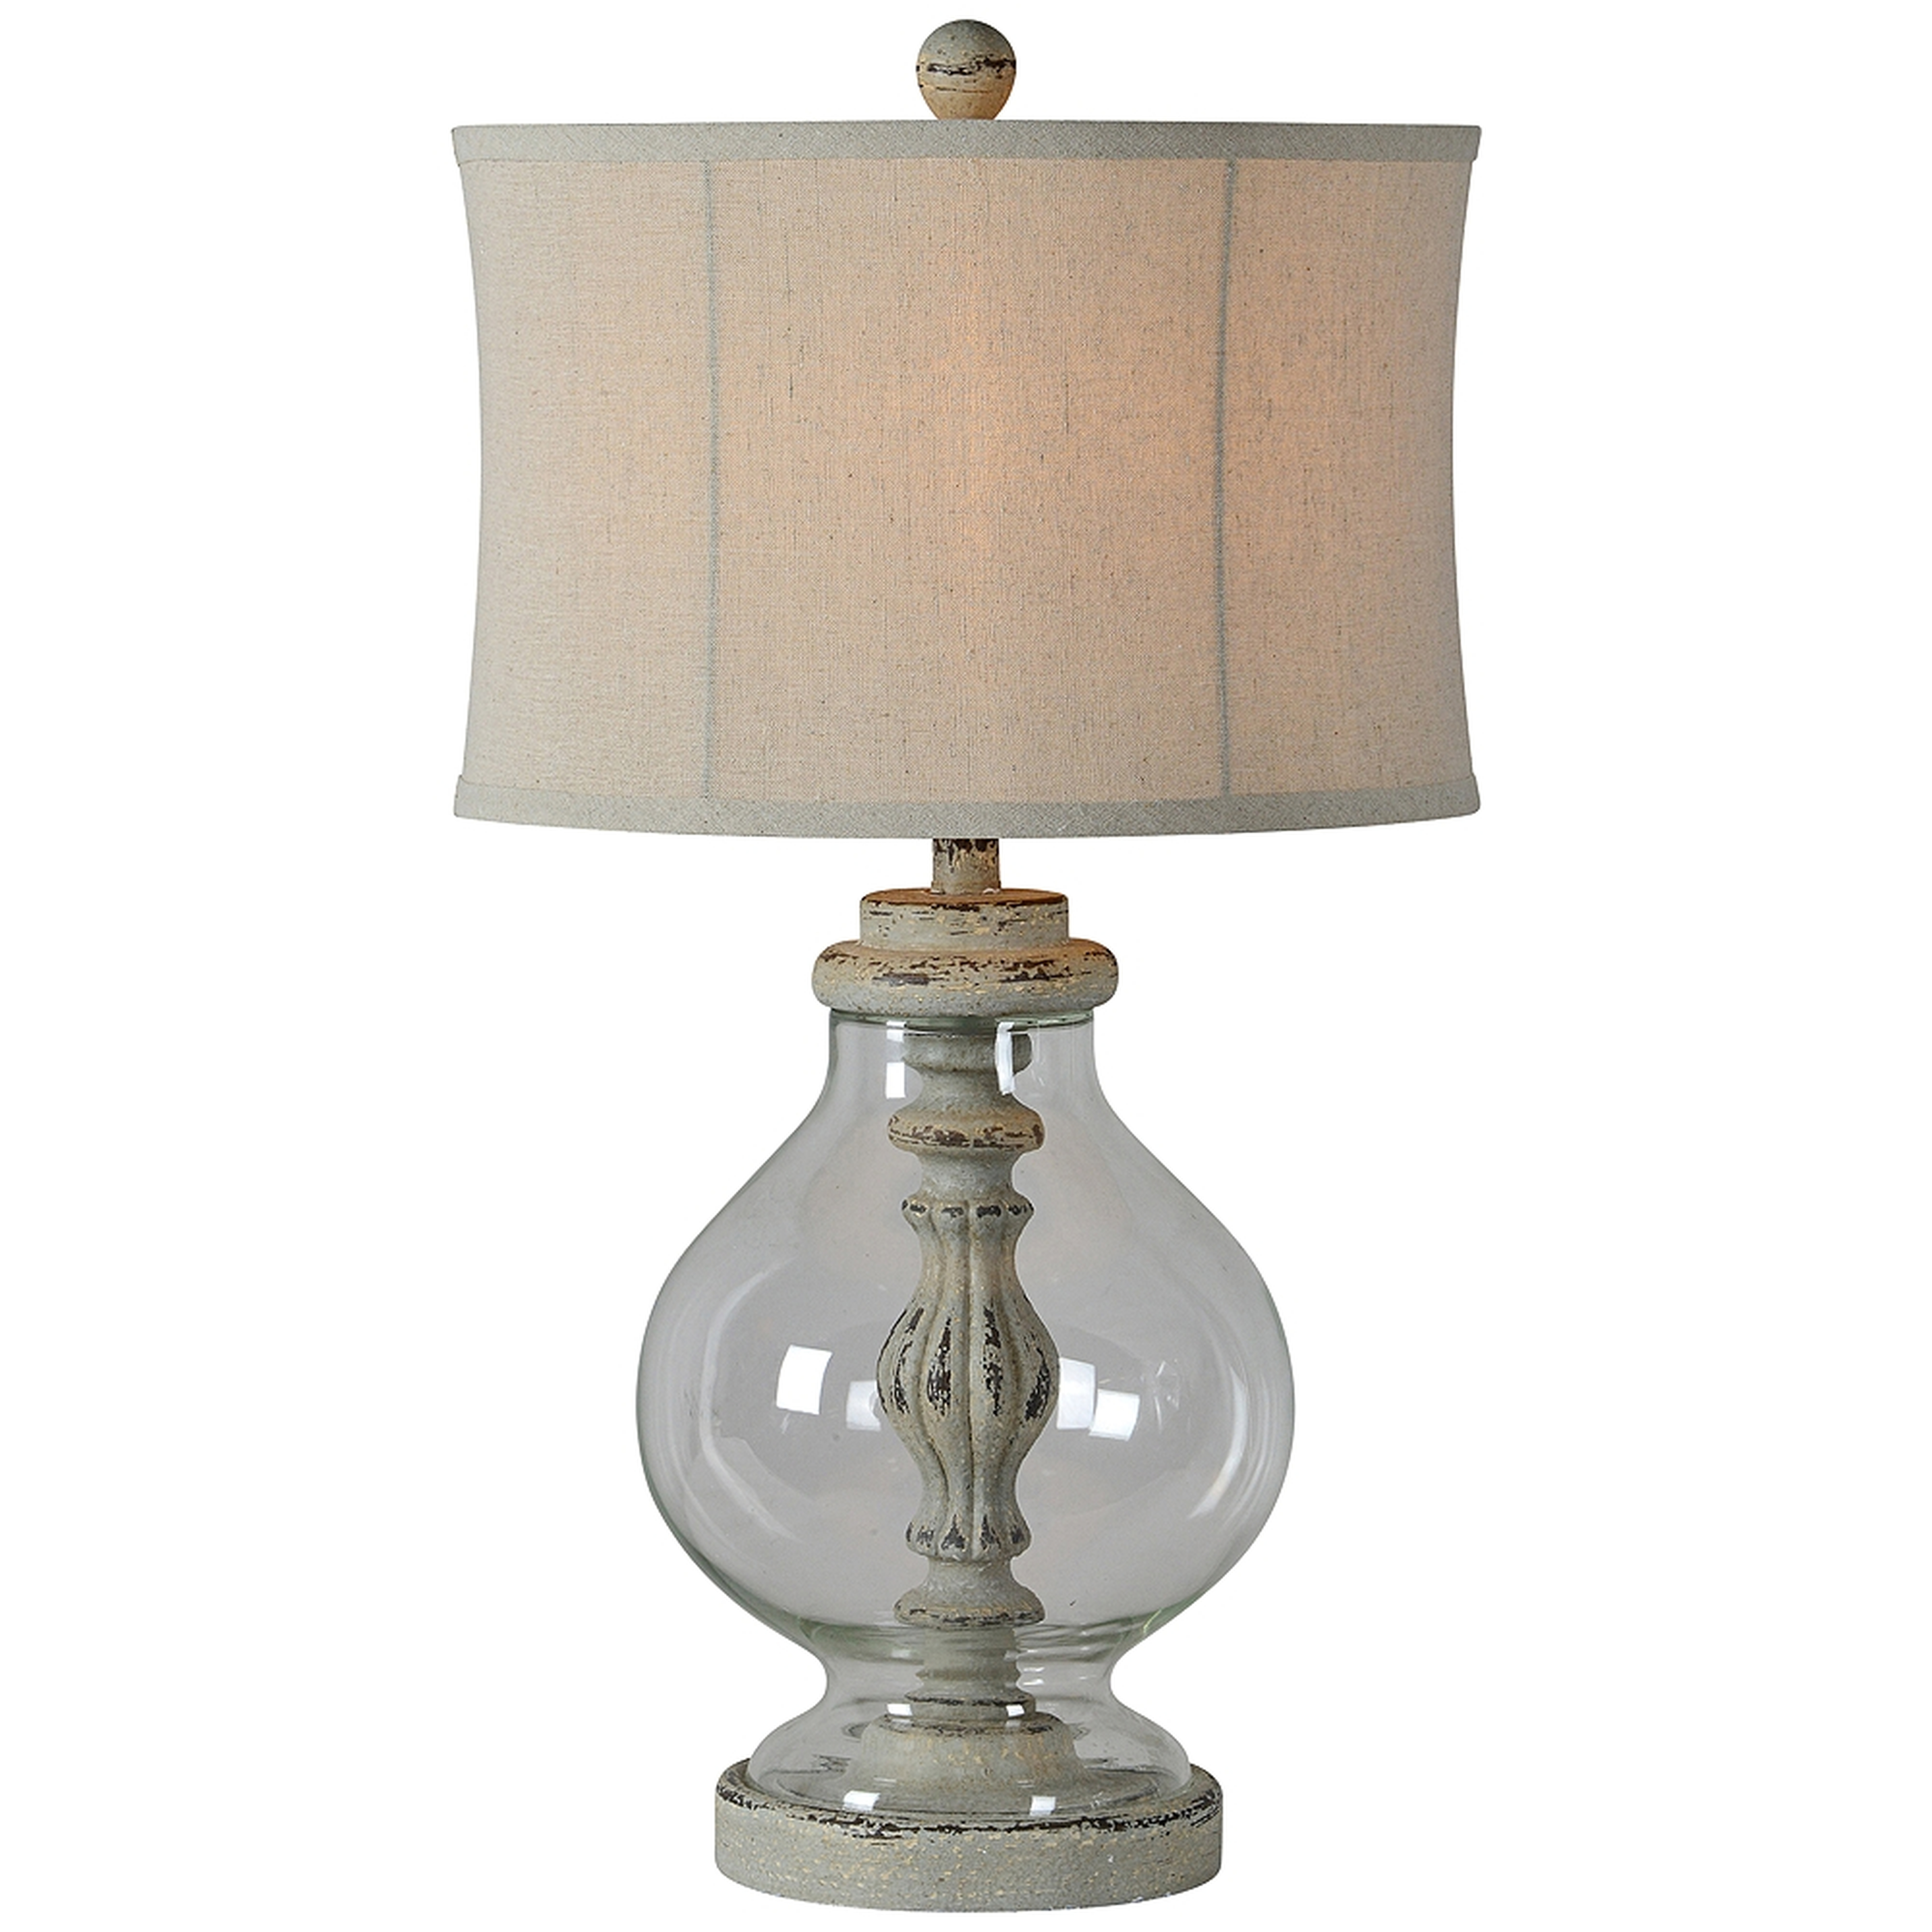 Forty West Emily Distressed Blue with Clear Glass Table Lamp - Style # 70A70 - Lamps Plus